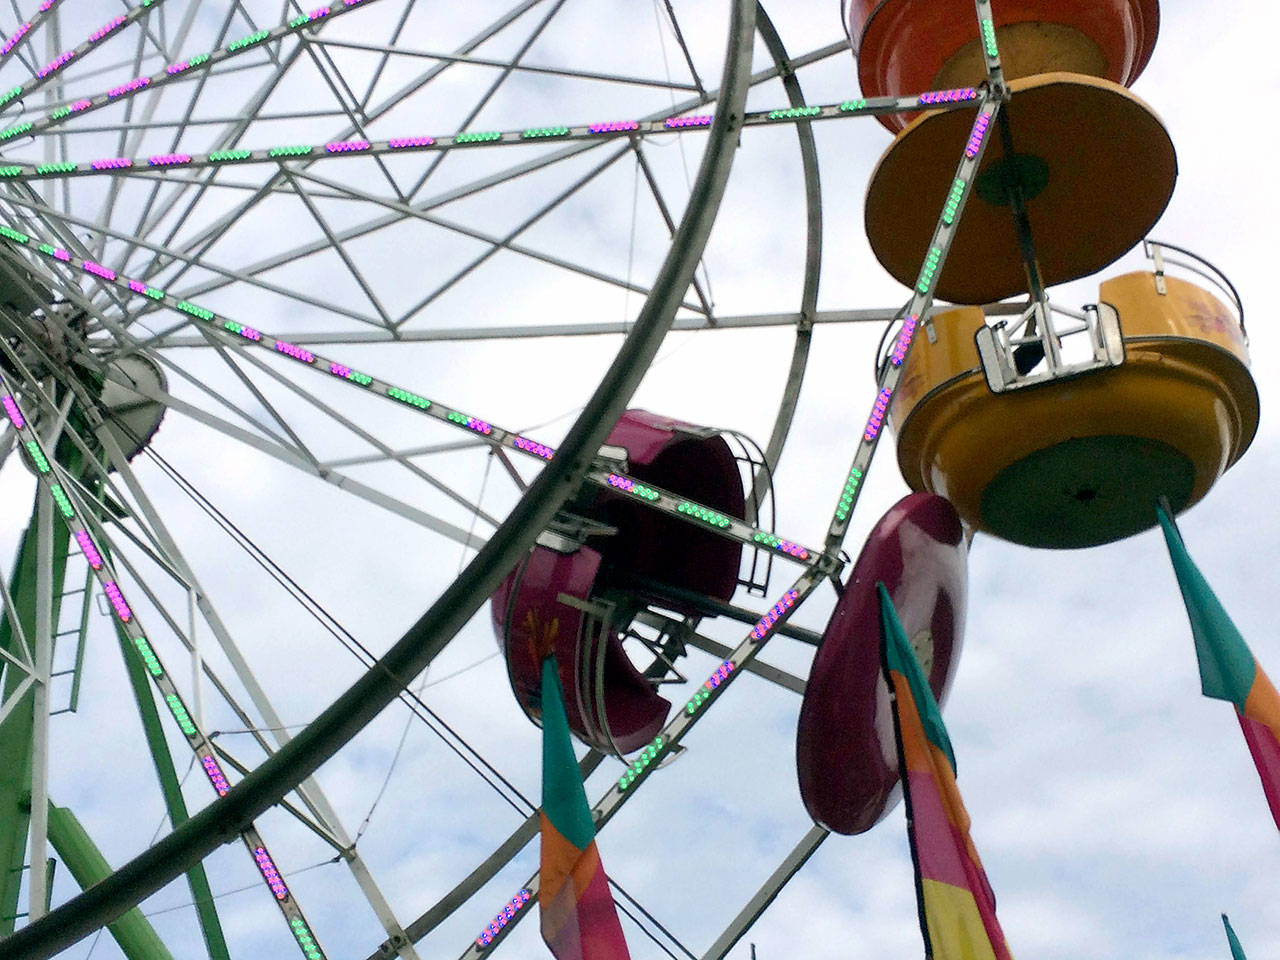 A gondola hangs open on a Ferris wheel after family members fell from it in May during the Port Townsend Rhododendron Festival. (Port Townsend Police Department)